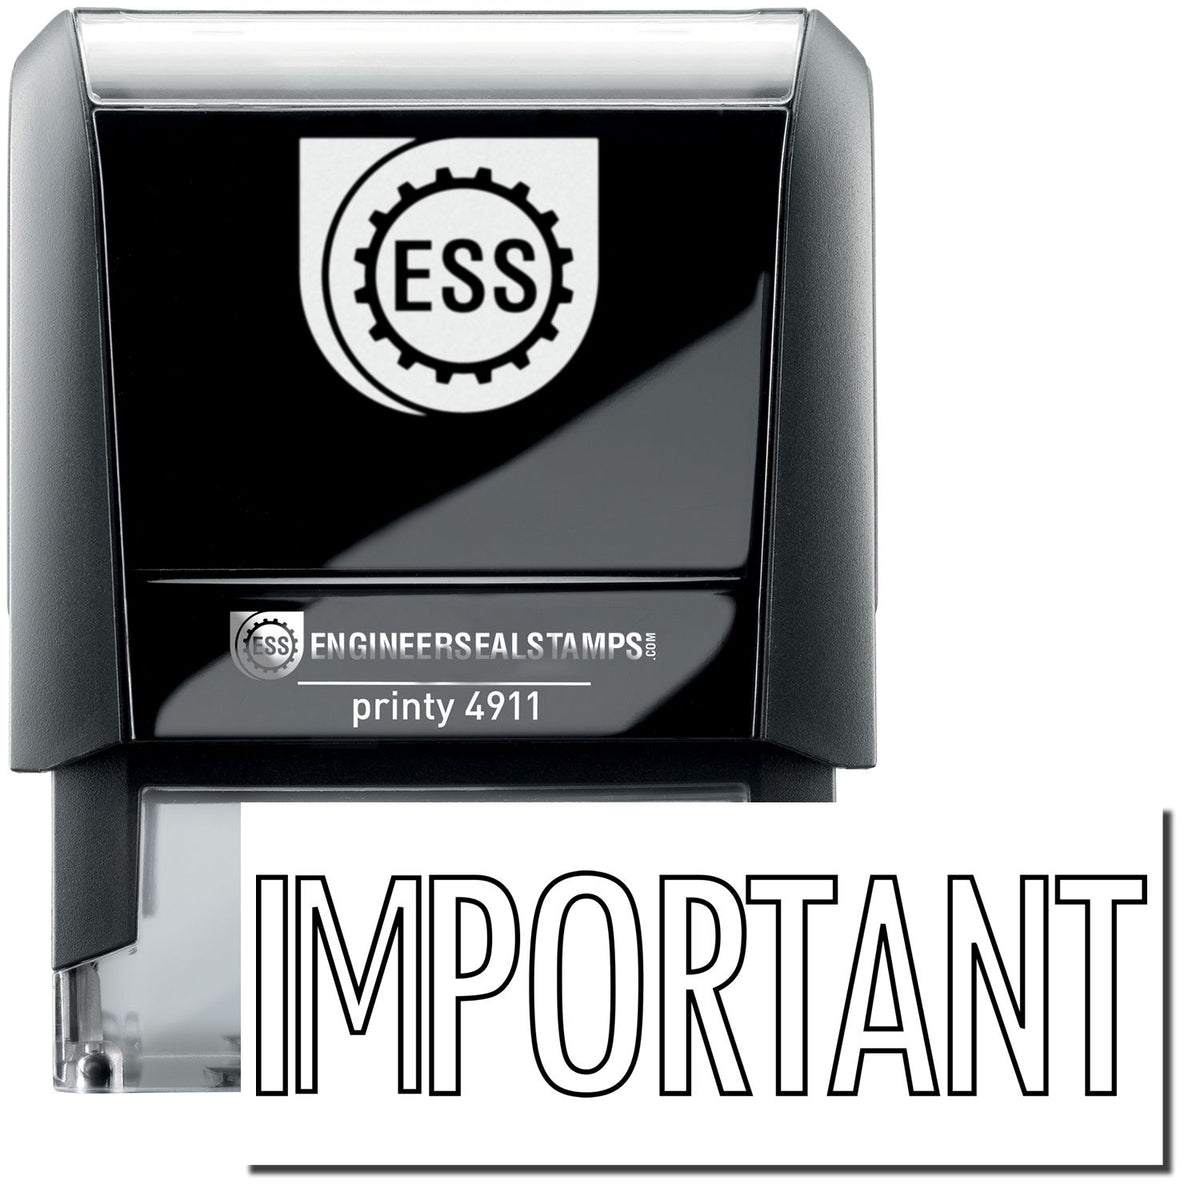 A self-inking stamp with a stamped image showing how the text &quot;IMPORTANT&quot; in an outline style is displayed after stamping.